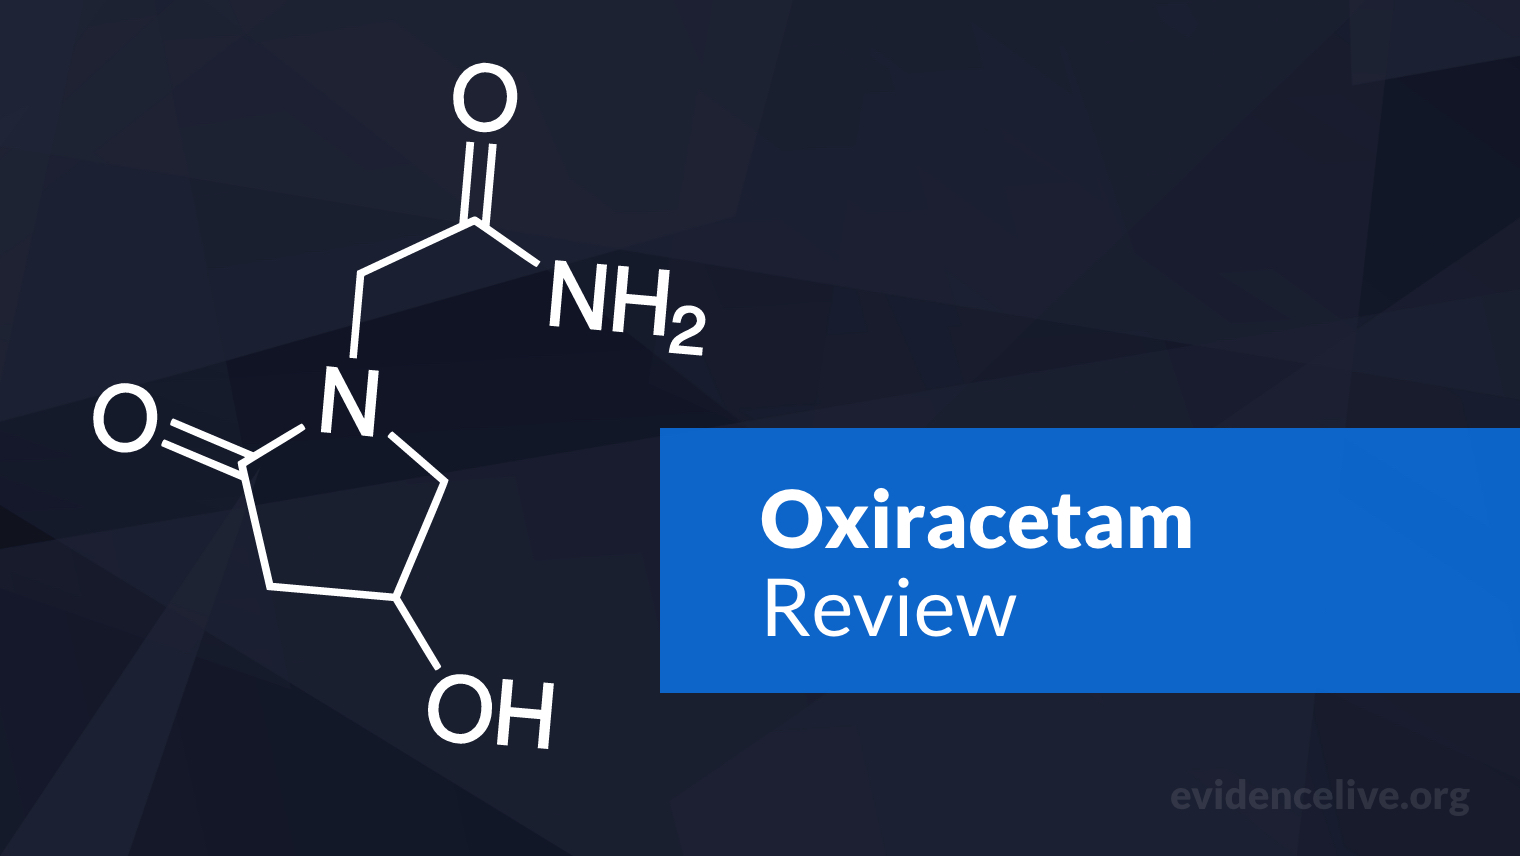 Oxiracetam Review: Benefits, Dosage, and Side Effects